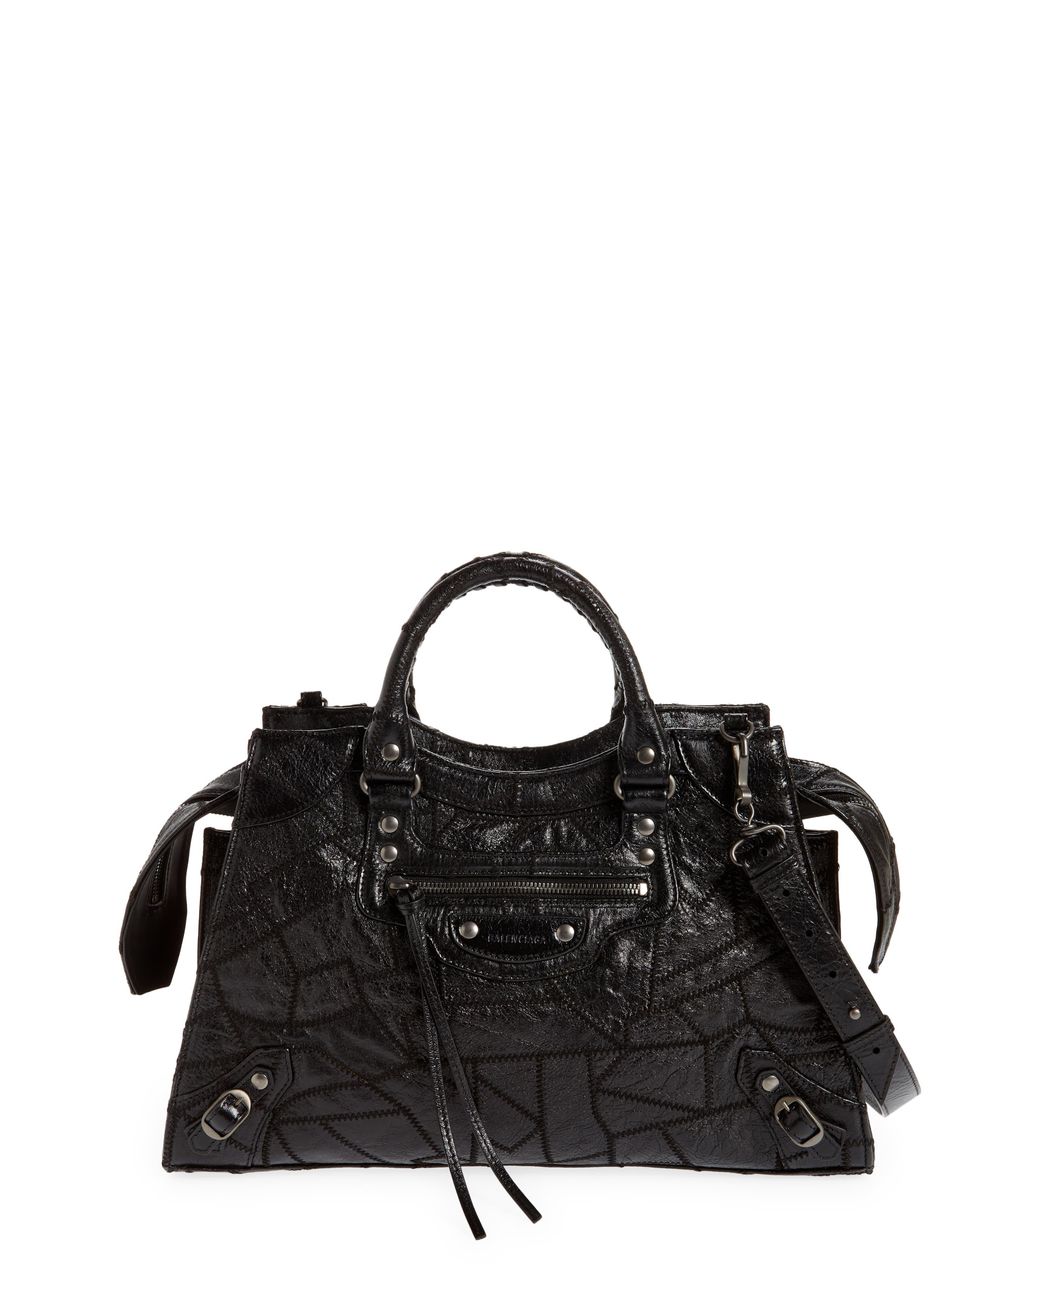 Balenciaga Patchwork Neo Classic City Leather Top Handle Bag in Black ...